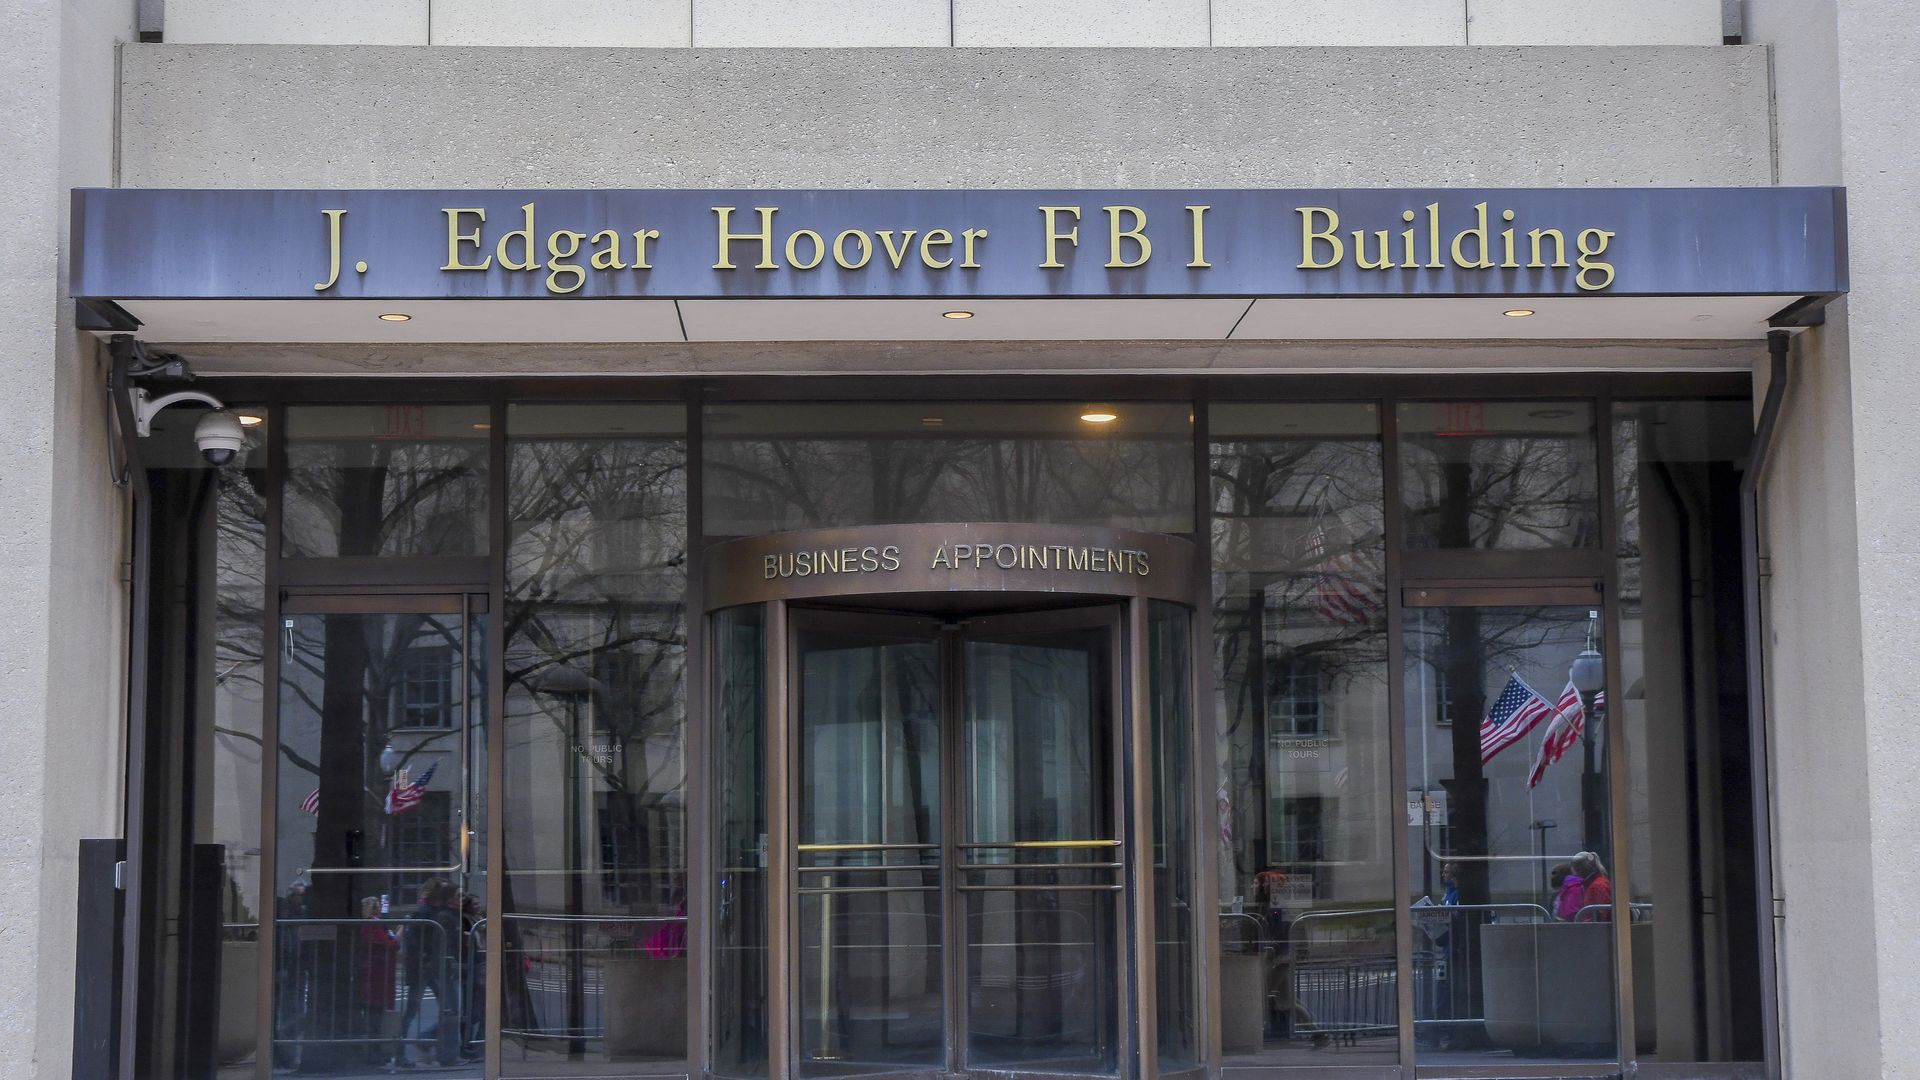 Photo of the entrance to the J. Edgar Hoover FBI Building